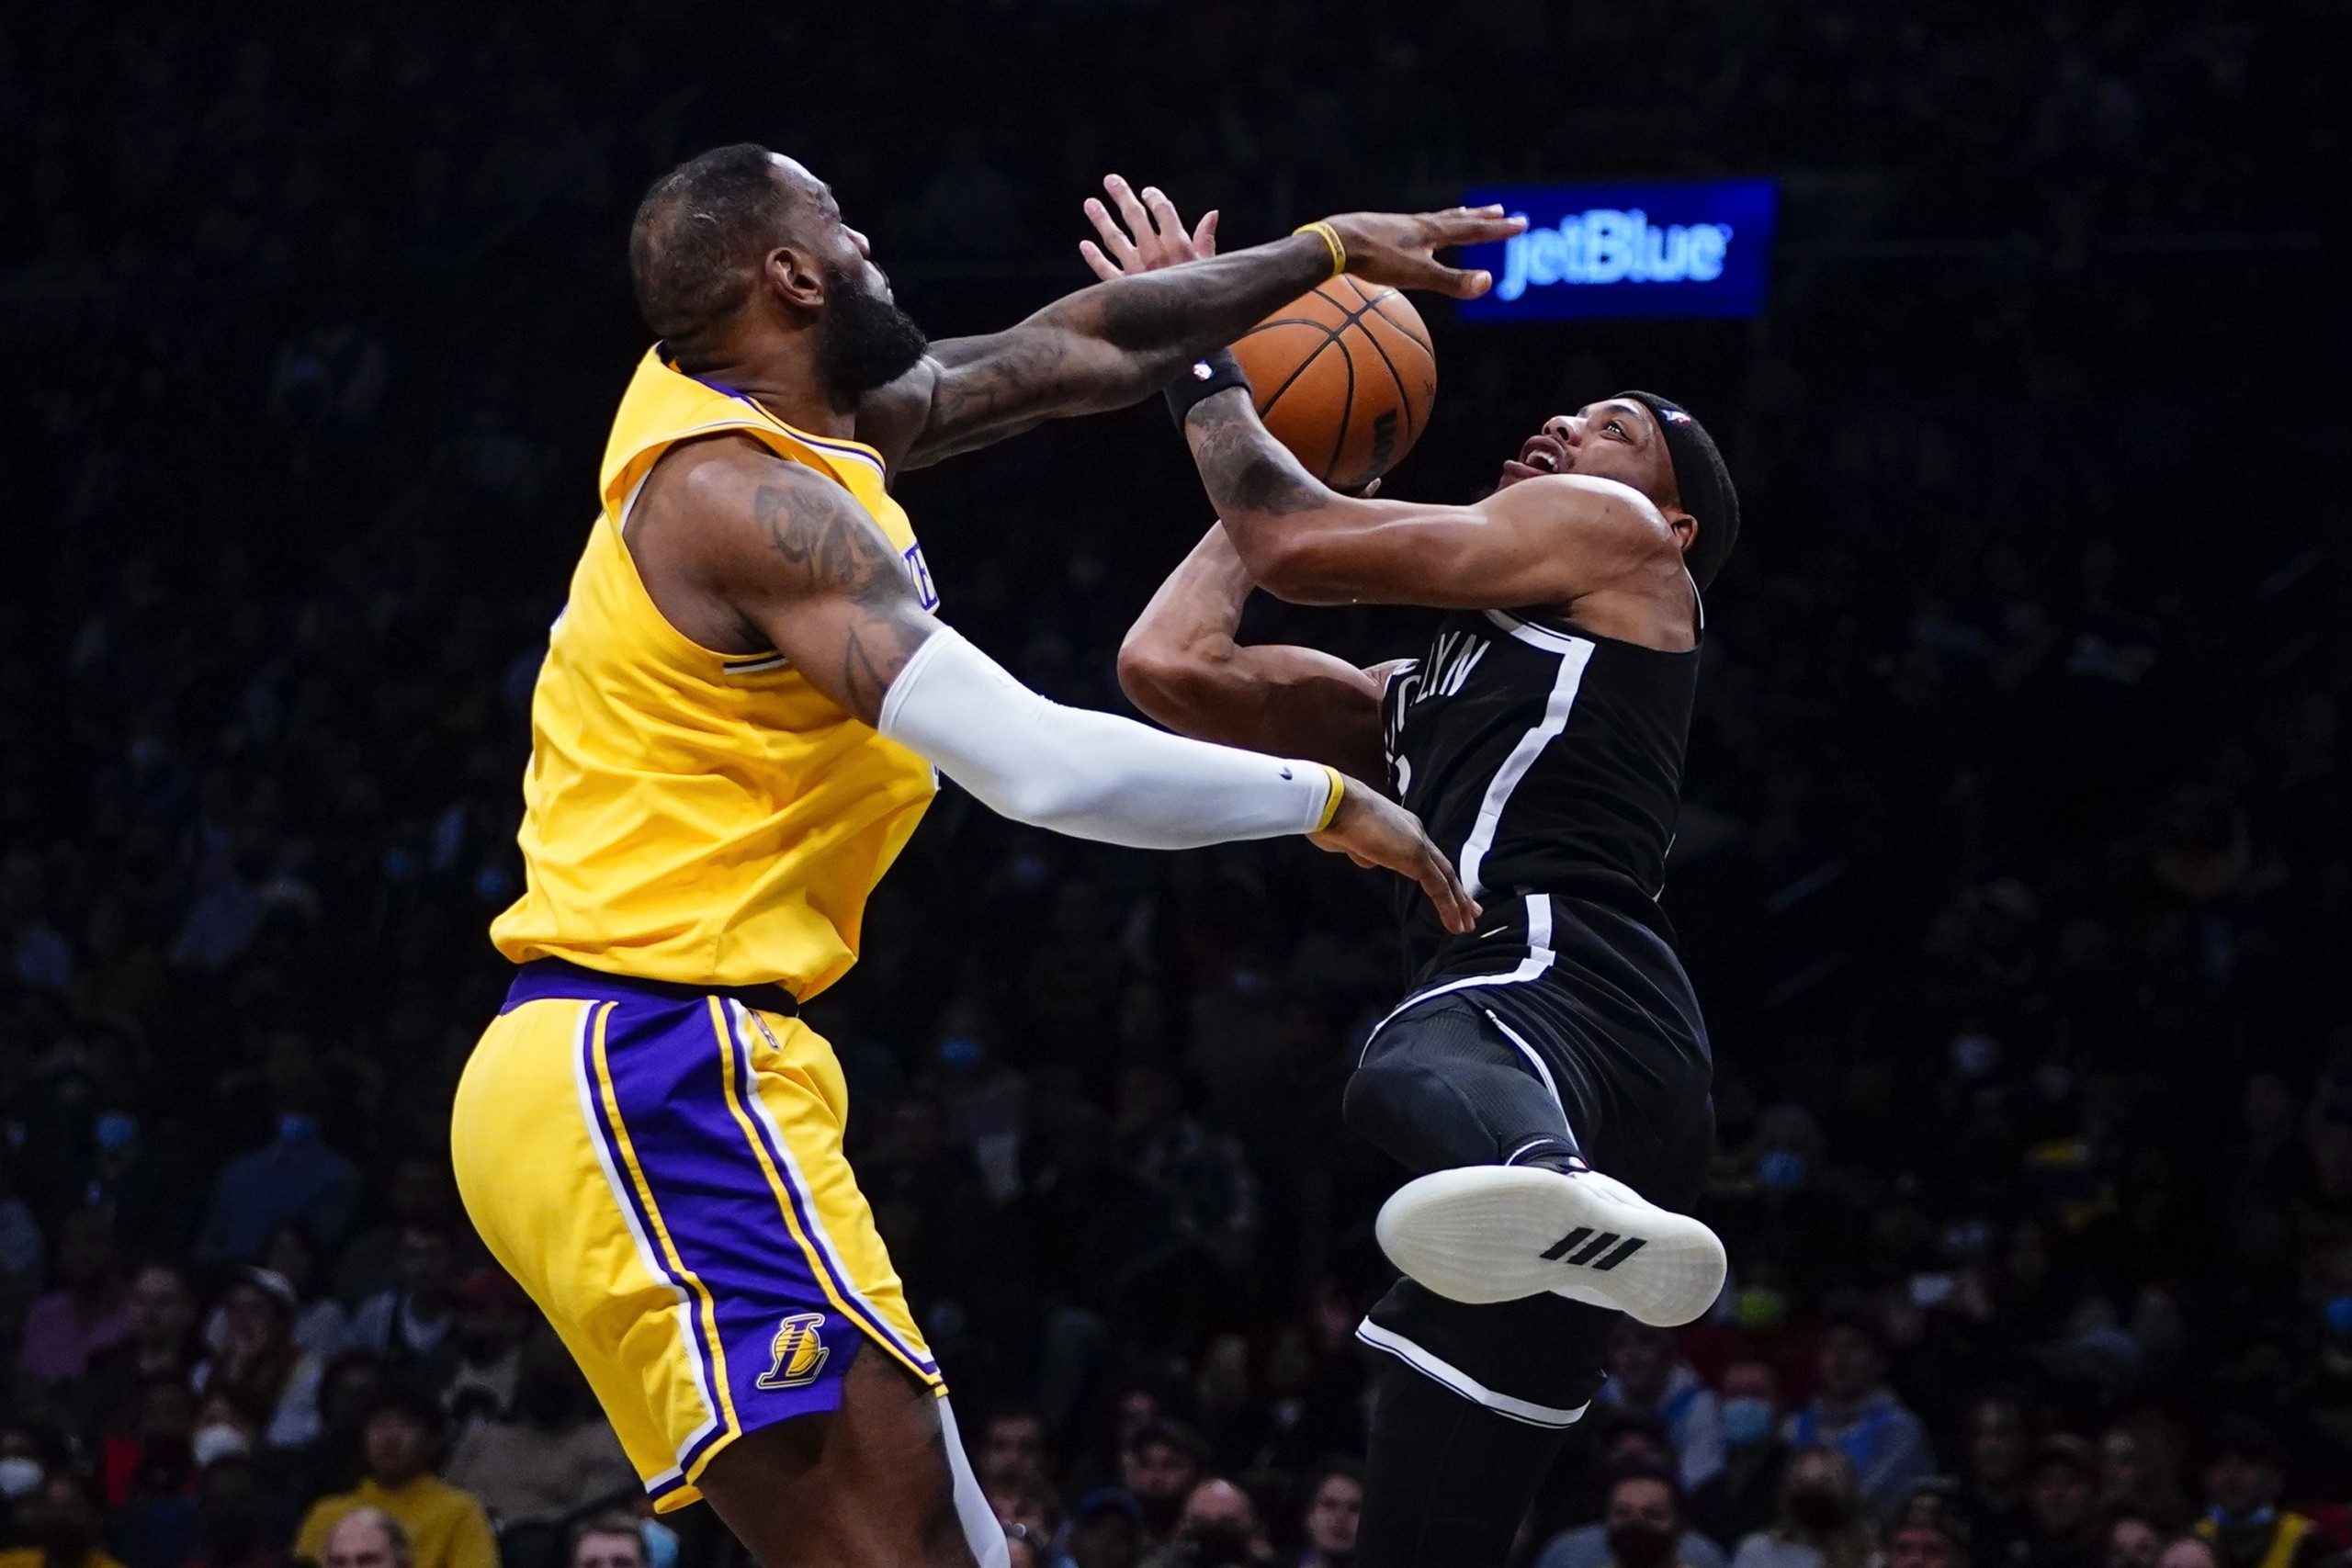 Los Angeles Lakers' LeBron James, left, blocks a shot by Brooklyn Nets' Bruce Brown, right, during the second half of an NBA basketball game Tuesday, Jan. 25, 2022 in New York. The Lakers won 106-96. (AP Photo/Frank Franklin II)